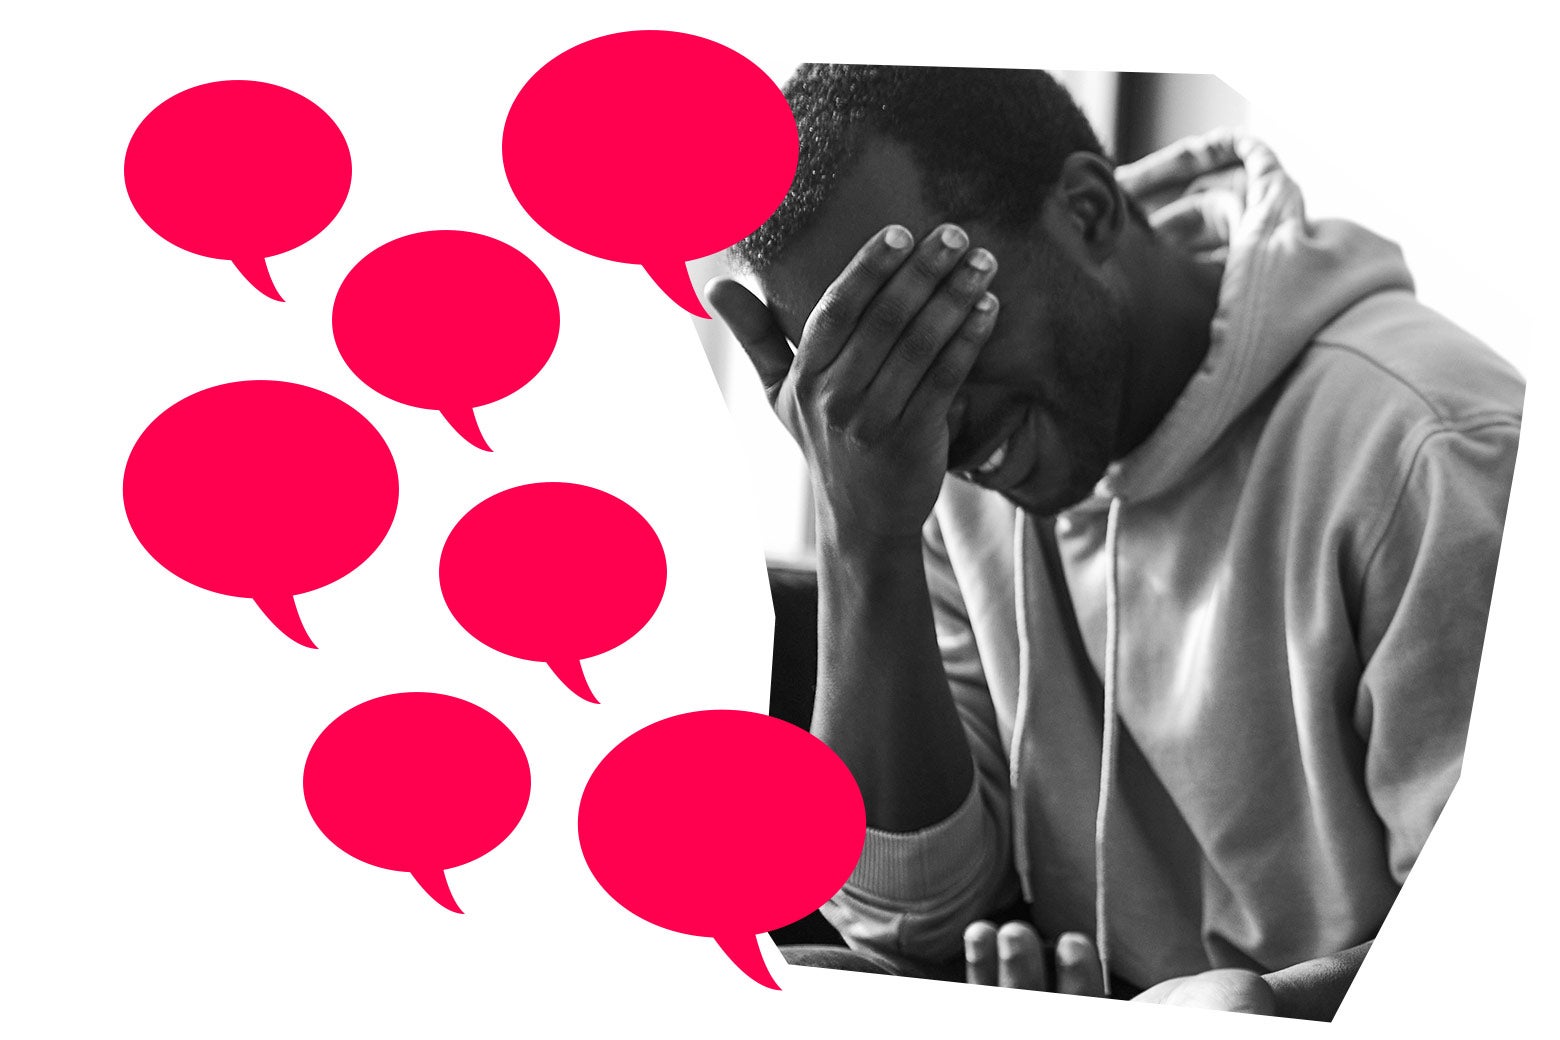 Graphics of a few speech bubbles, and a man covering up his face with his hand.